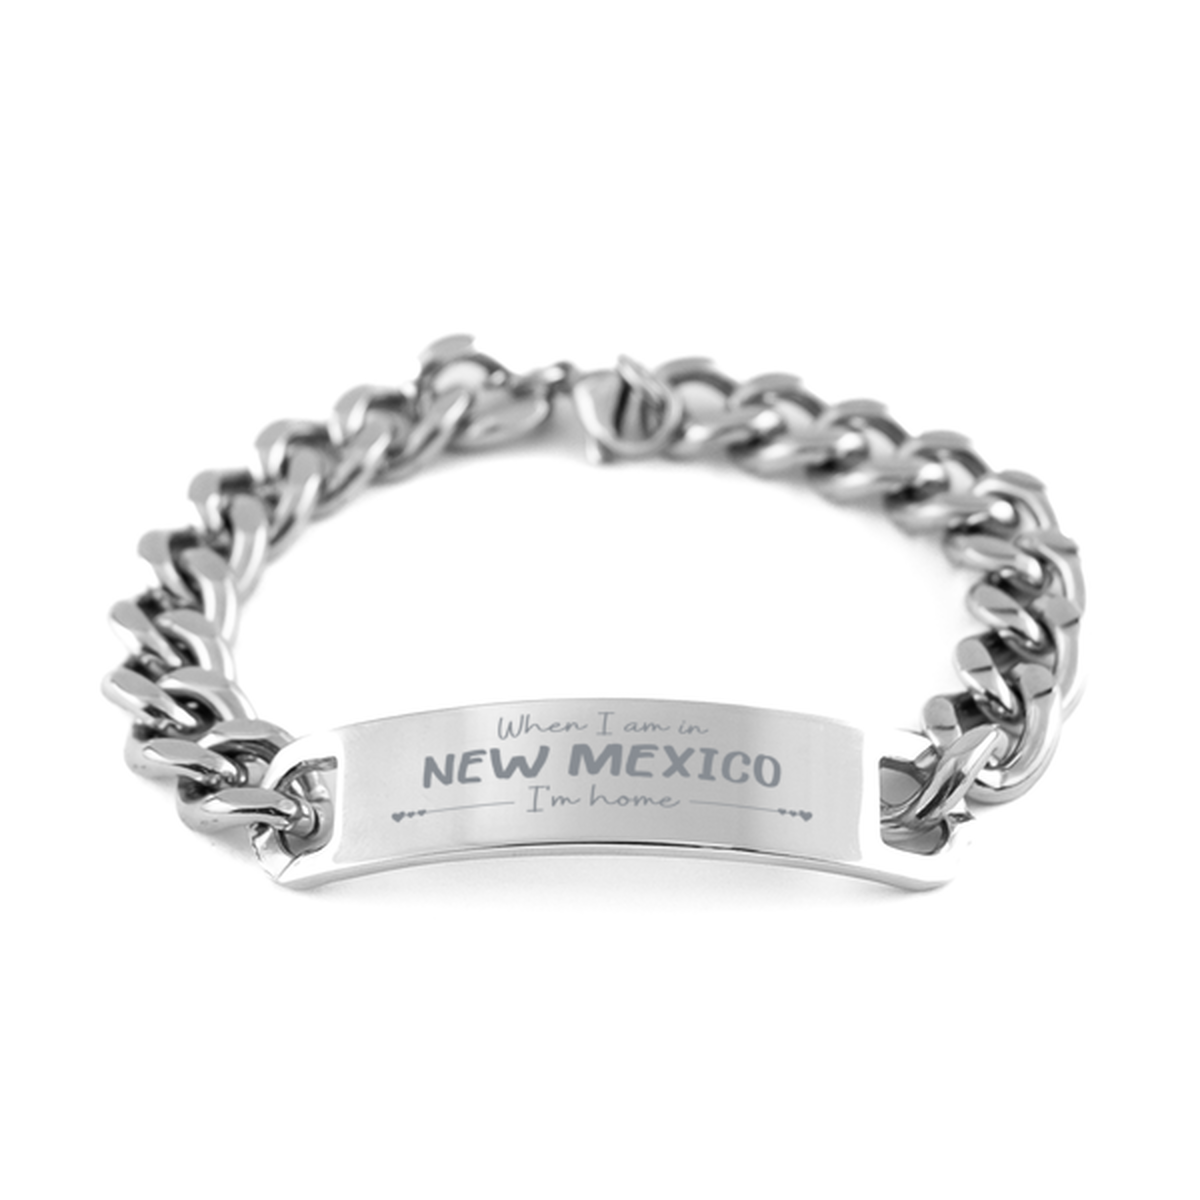 When I am in New Mexico I'm home Cuban Chain Stainless Steel Bracelet, Cheap Gifts For New Mexico, State New Mexico Birthday Gifts for Friends Coworker